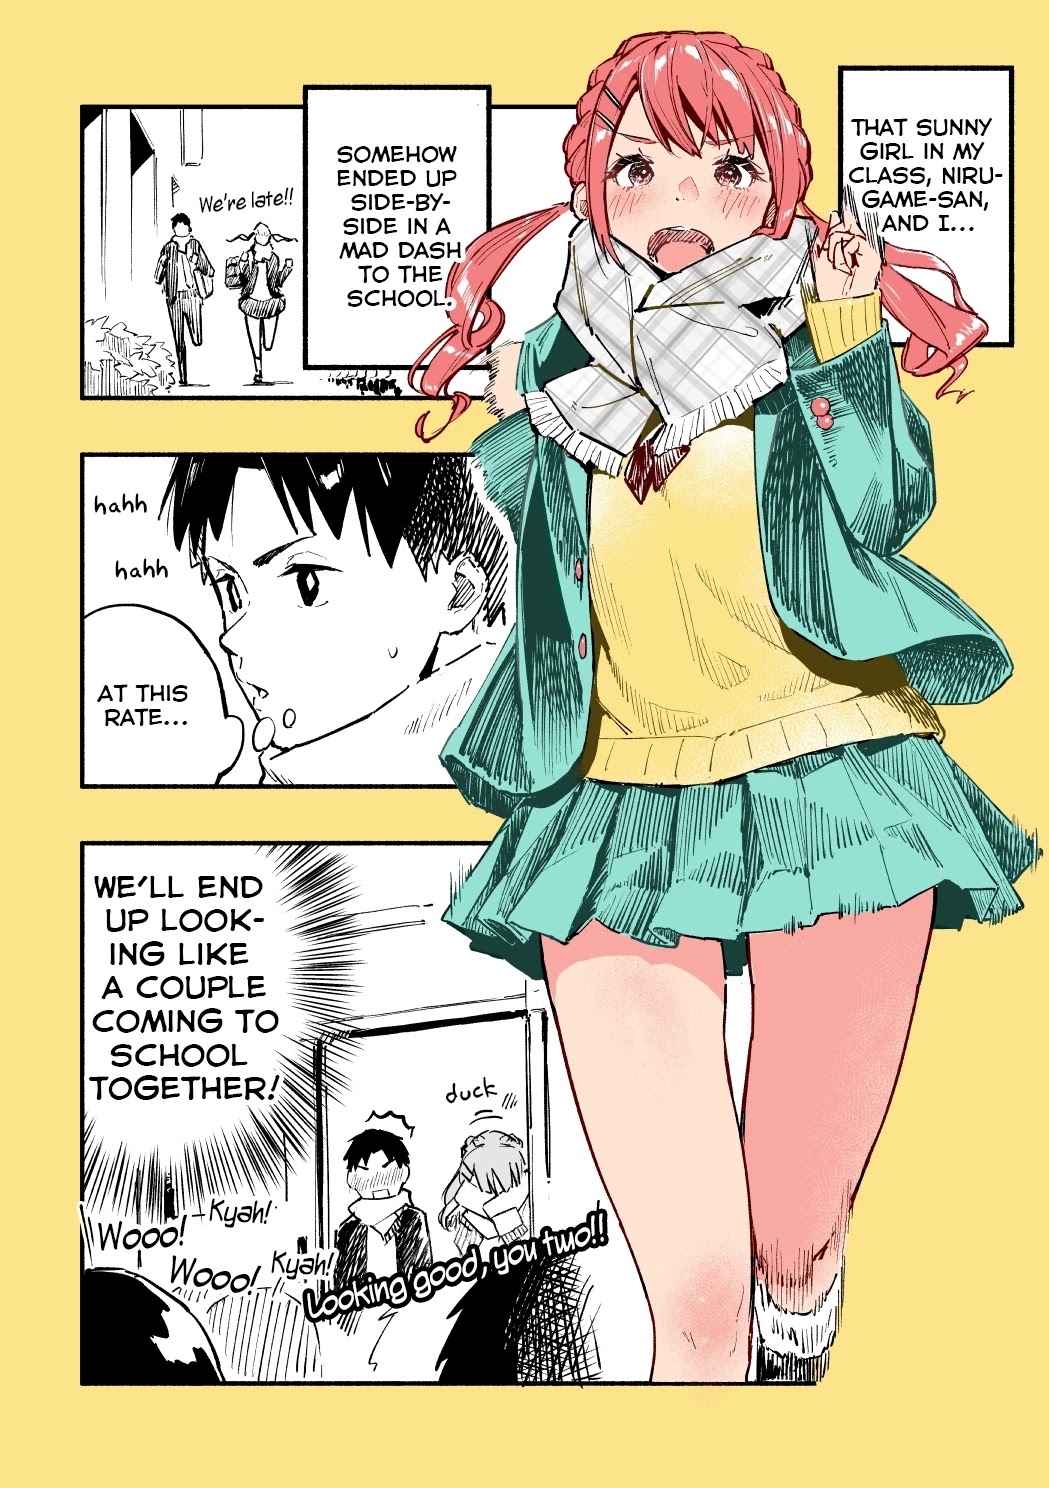 Nirugame-Chan With The Huge Ass And Usami-Kun - Page 1